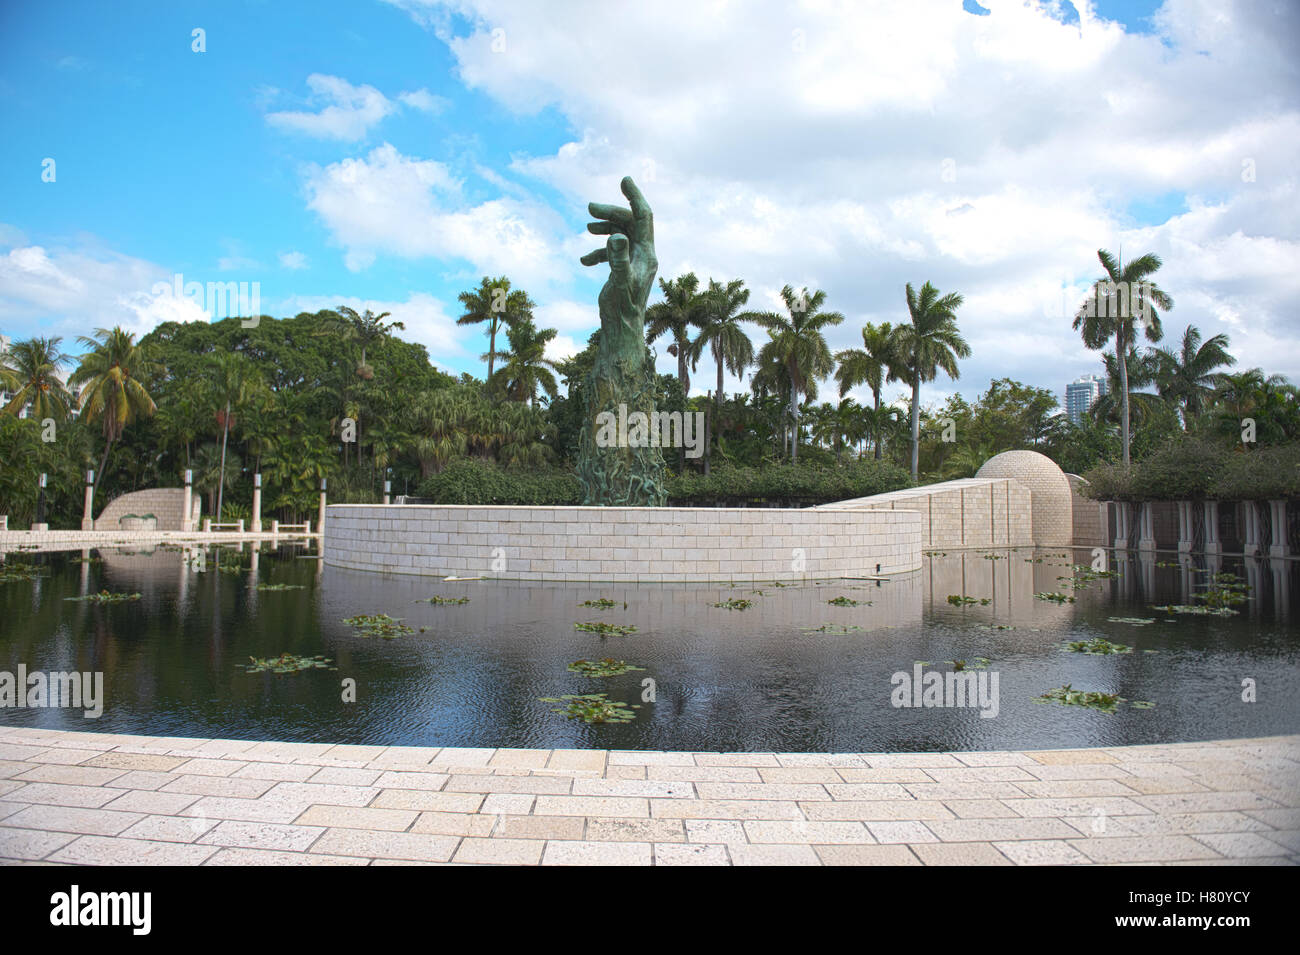 Holocaust Memorial Museum. Miami Beach, Florida, In memory of the 6 million Jewish victims of the Holocaust. Stock Photo